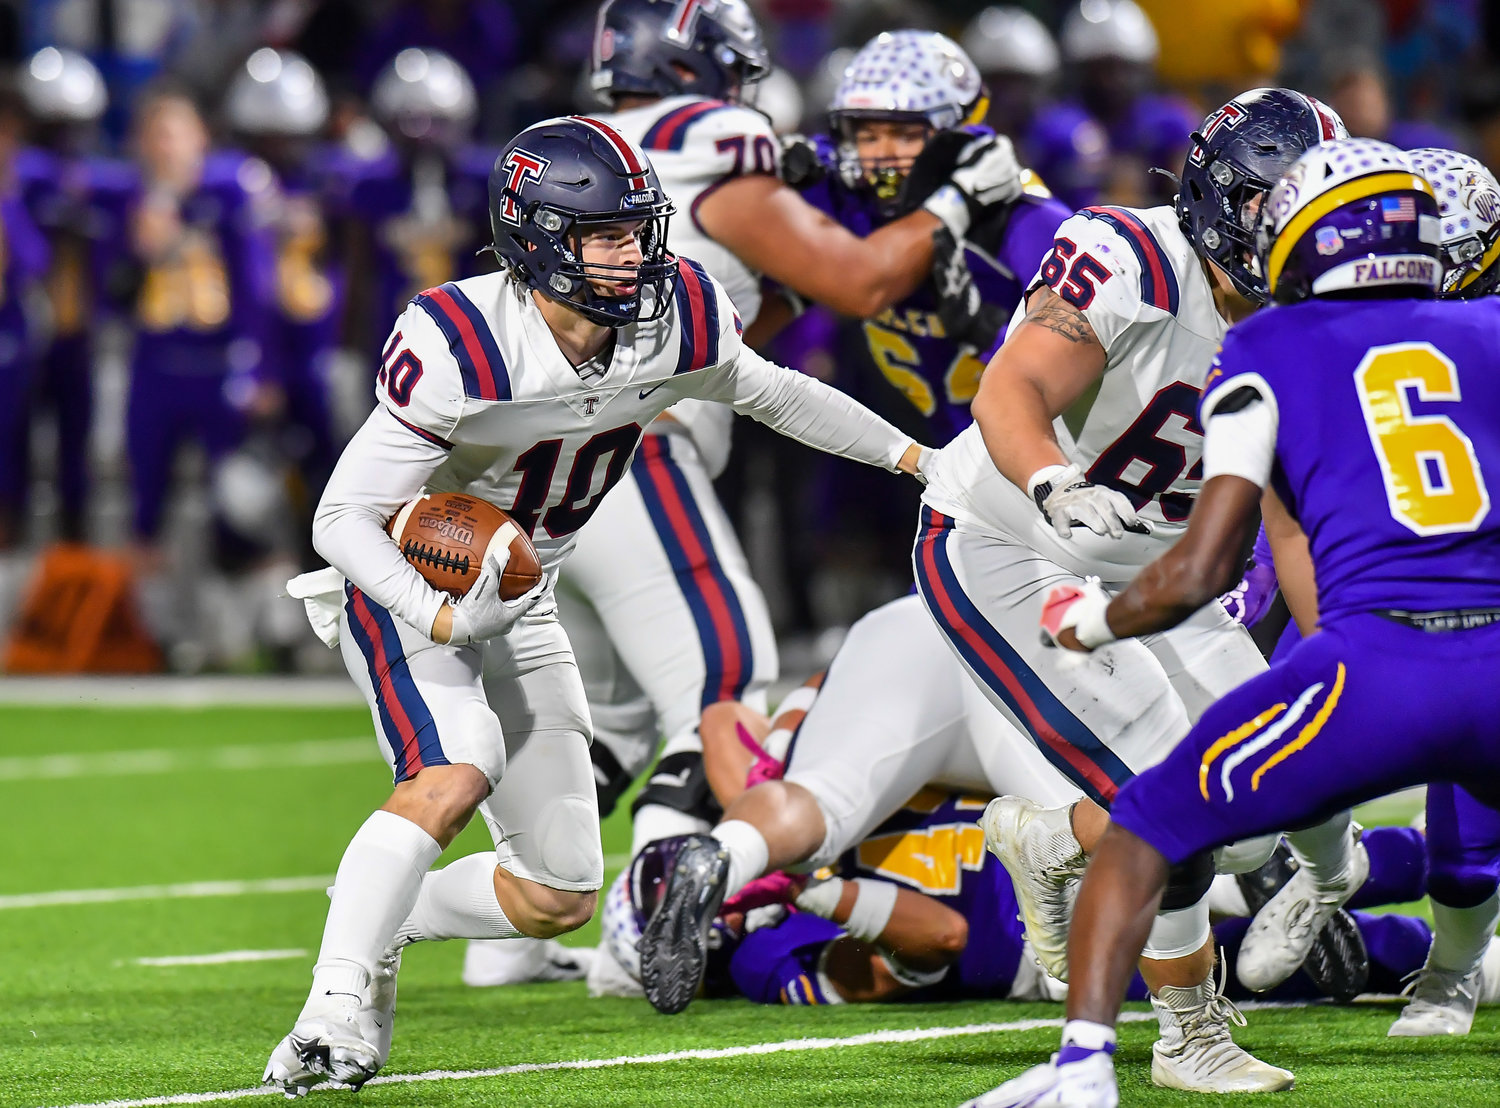 Houston Tx. Nov 19, 2021: Tompkins #10 Wyatt Young gets some blocking help from team mate #65 Ethan Vazquez was he carries the ball during the UIL area playoff game between Tompkins and Jersey Village at Pridgeon Stadium in Houston. (Photo by Mark Goodman / Katy Times)